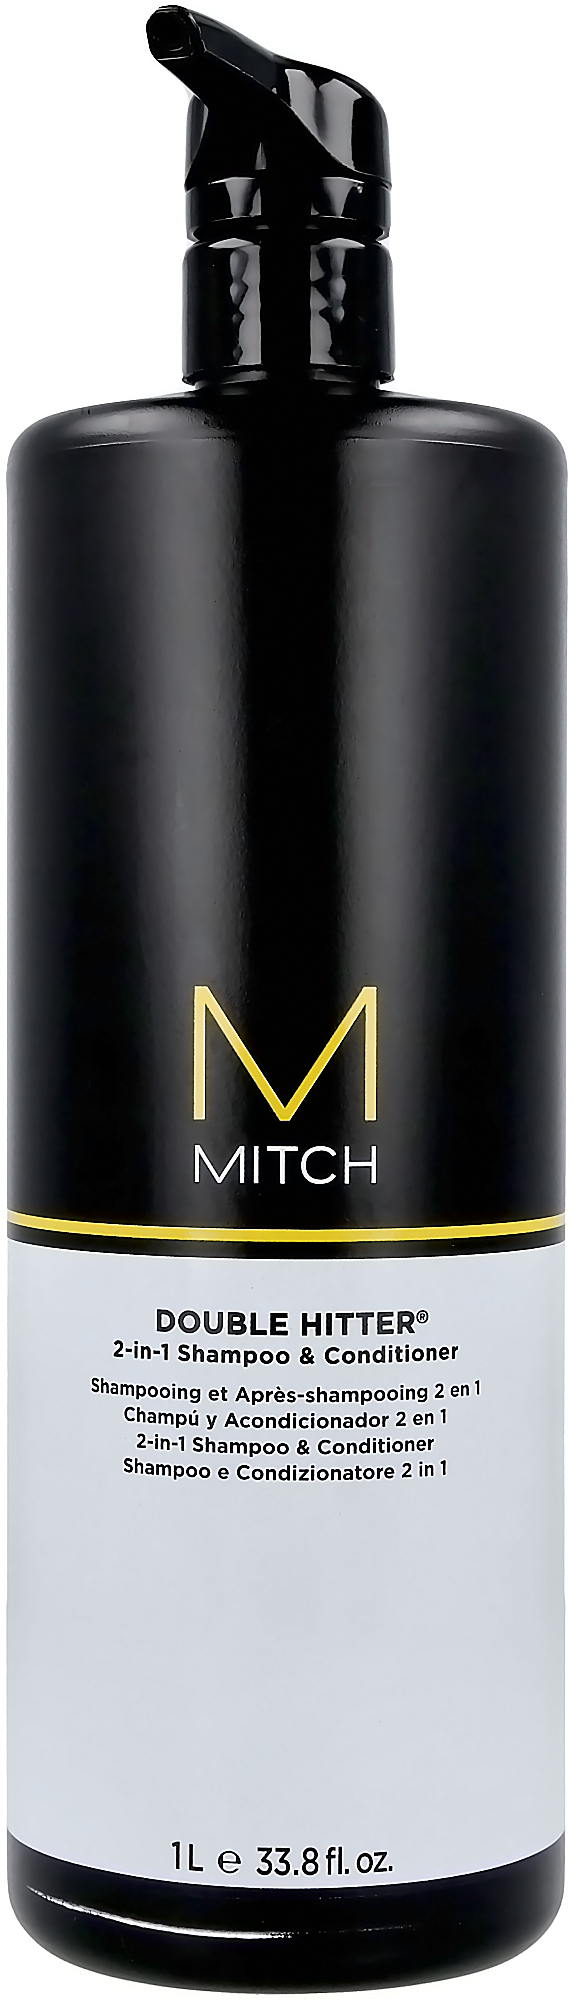 Paul Mitchell Mitch Double Hitter Shampoo & Conditioner 1L